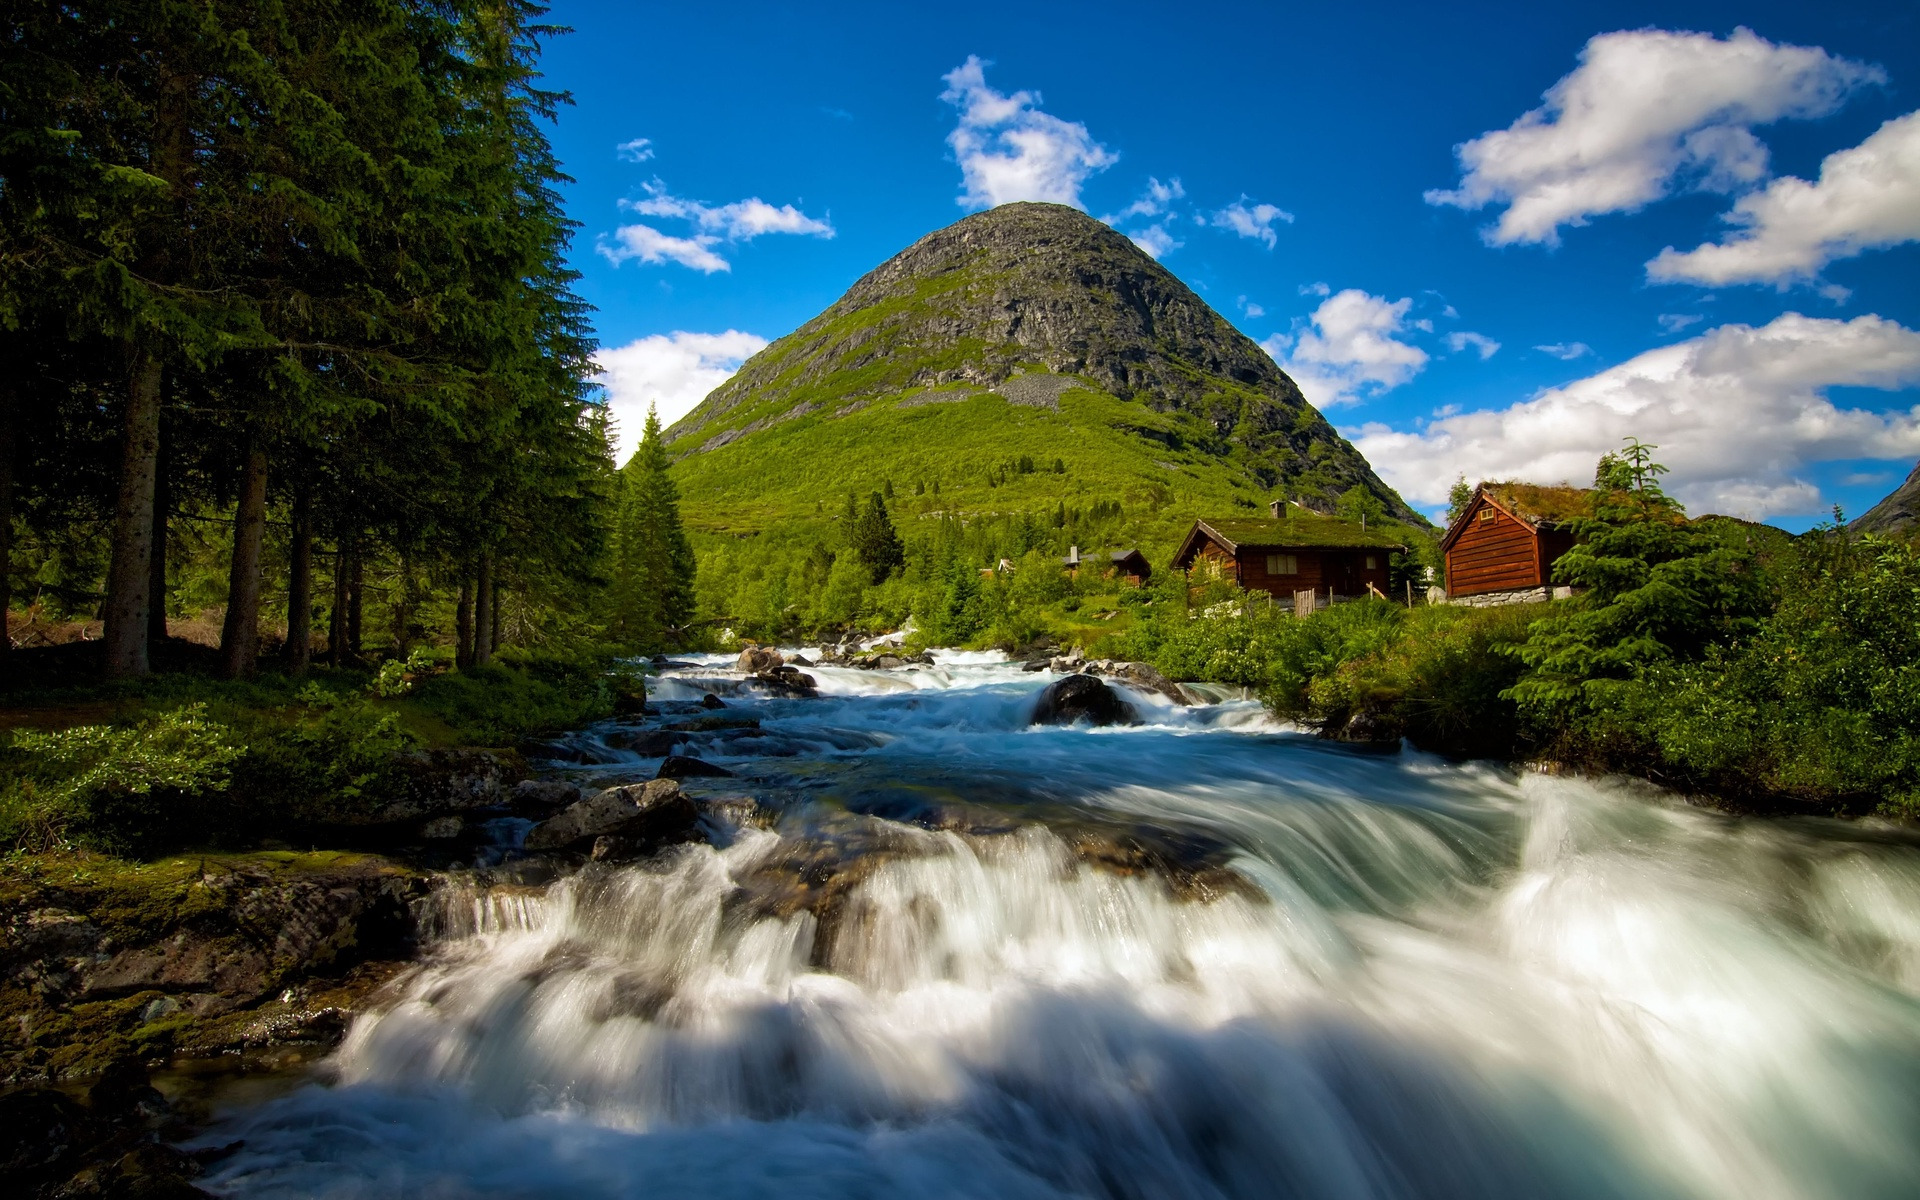 nature, Landscape, Mountains, Clouds, Norway, Hills, Stream, Trees, Forest, House, Rock, Stones, Long Exposure, Water Wallpaper